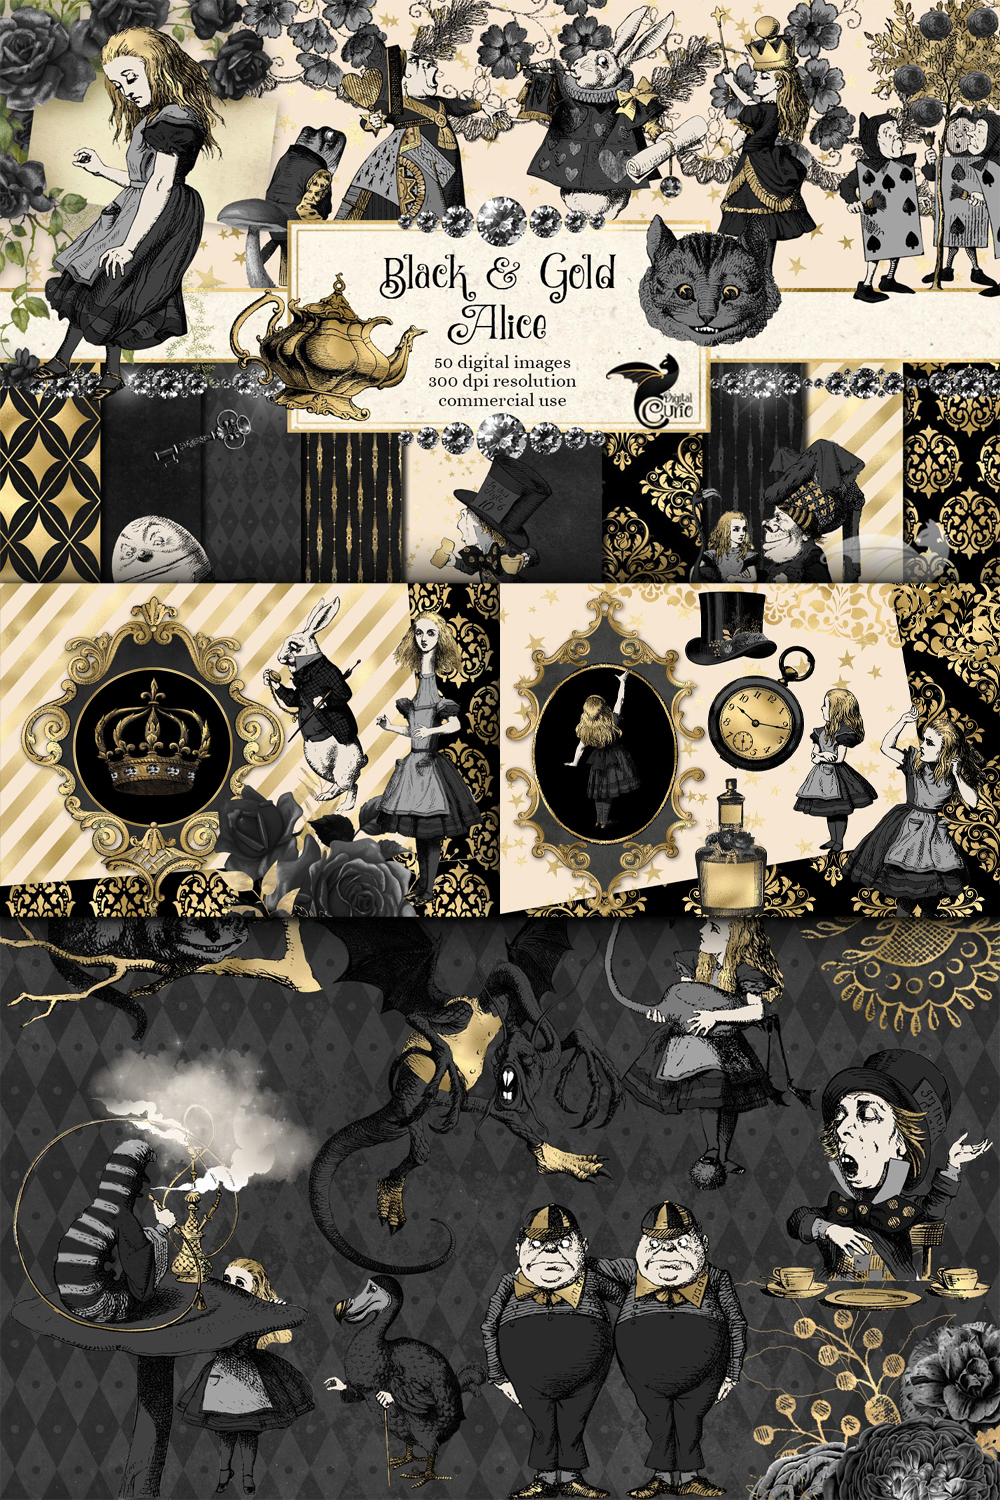 Black and gold alice in wonderland graphics of pinterest.